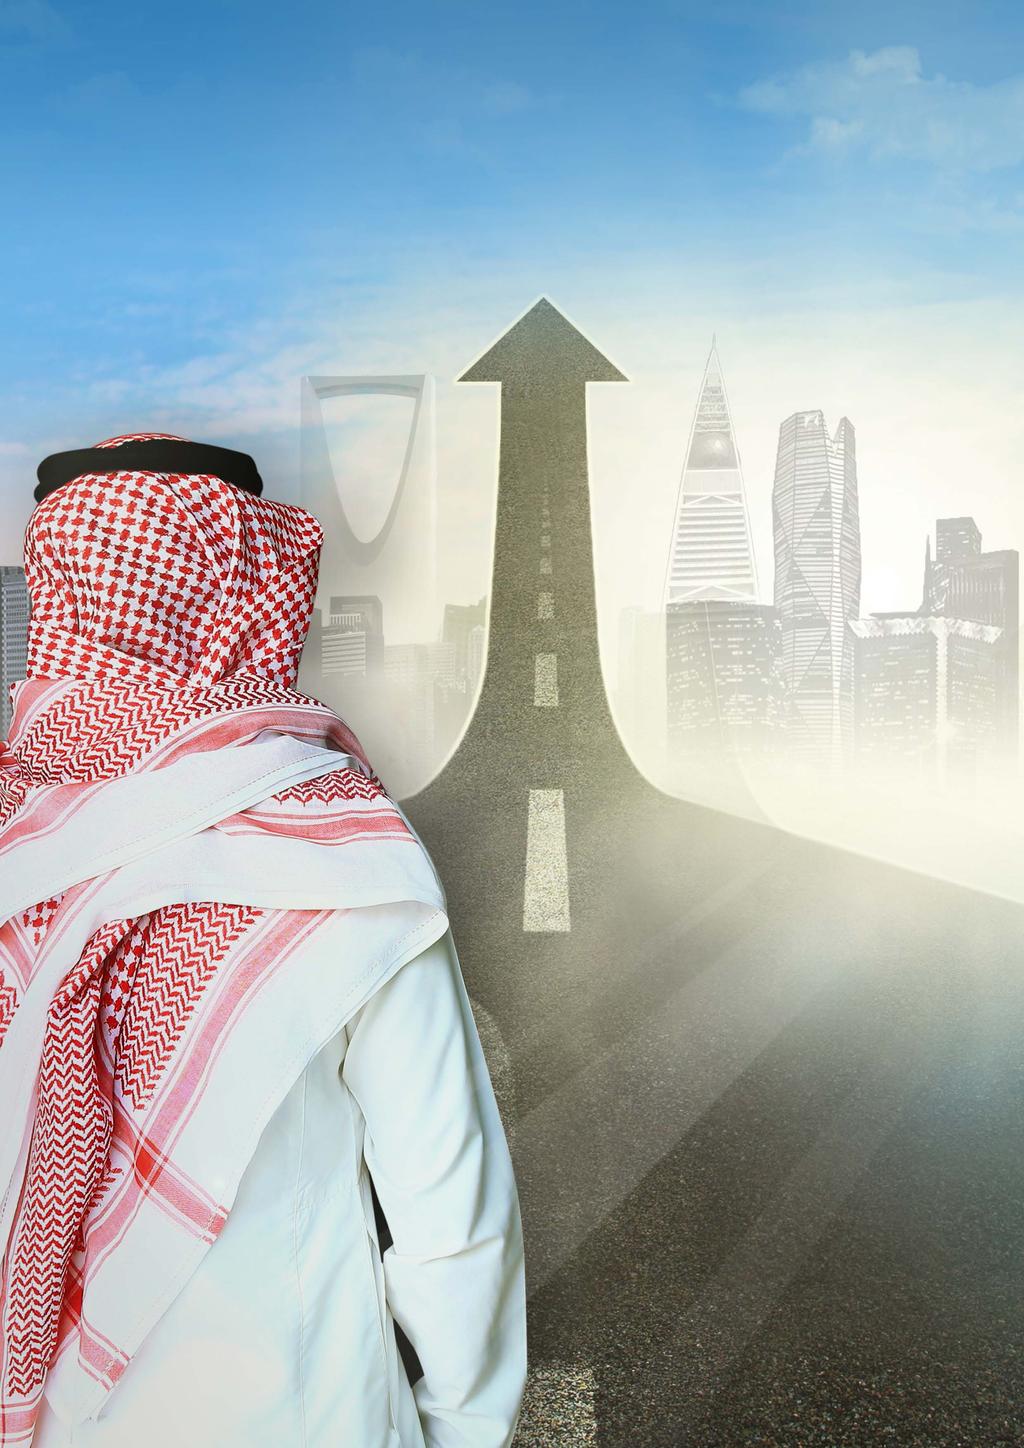 SAUDI S VISION STRATEGIC FOR 2030 DISCLAIMER: THE ANALYSIS PREPARED BY SAPRAC IN THIS ARTICLE DOES NOT REFLECT THE VIEW OR POSITION OF THE GOVERNMENT OF SAUDI ARABIA, NOR